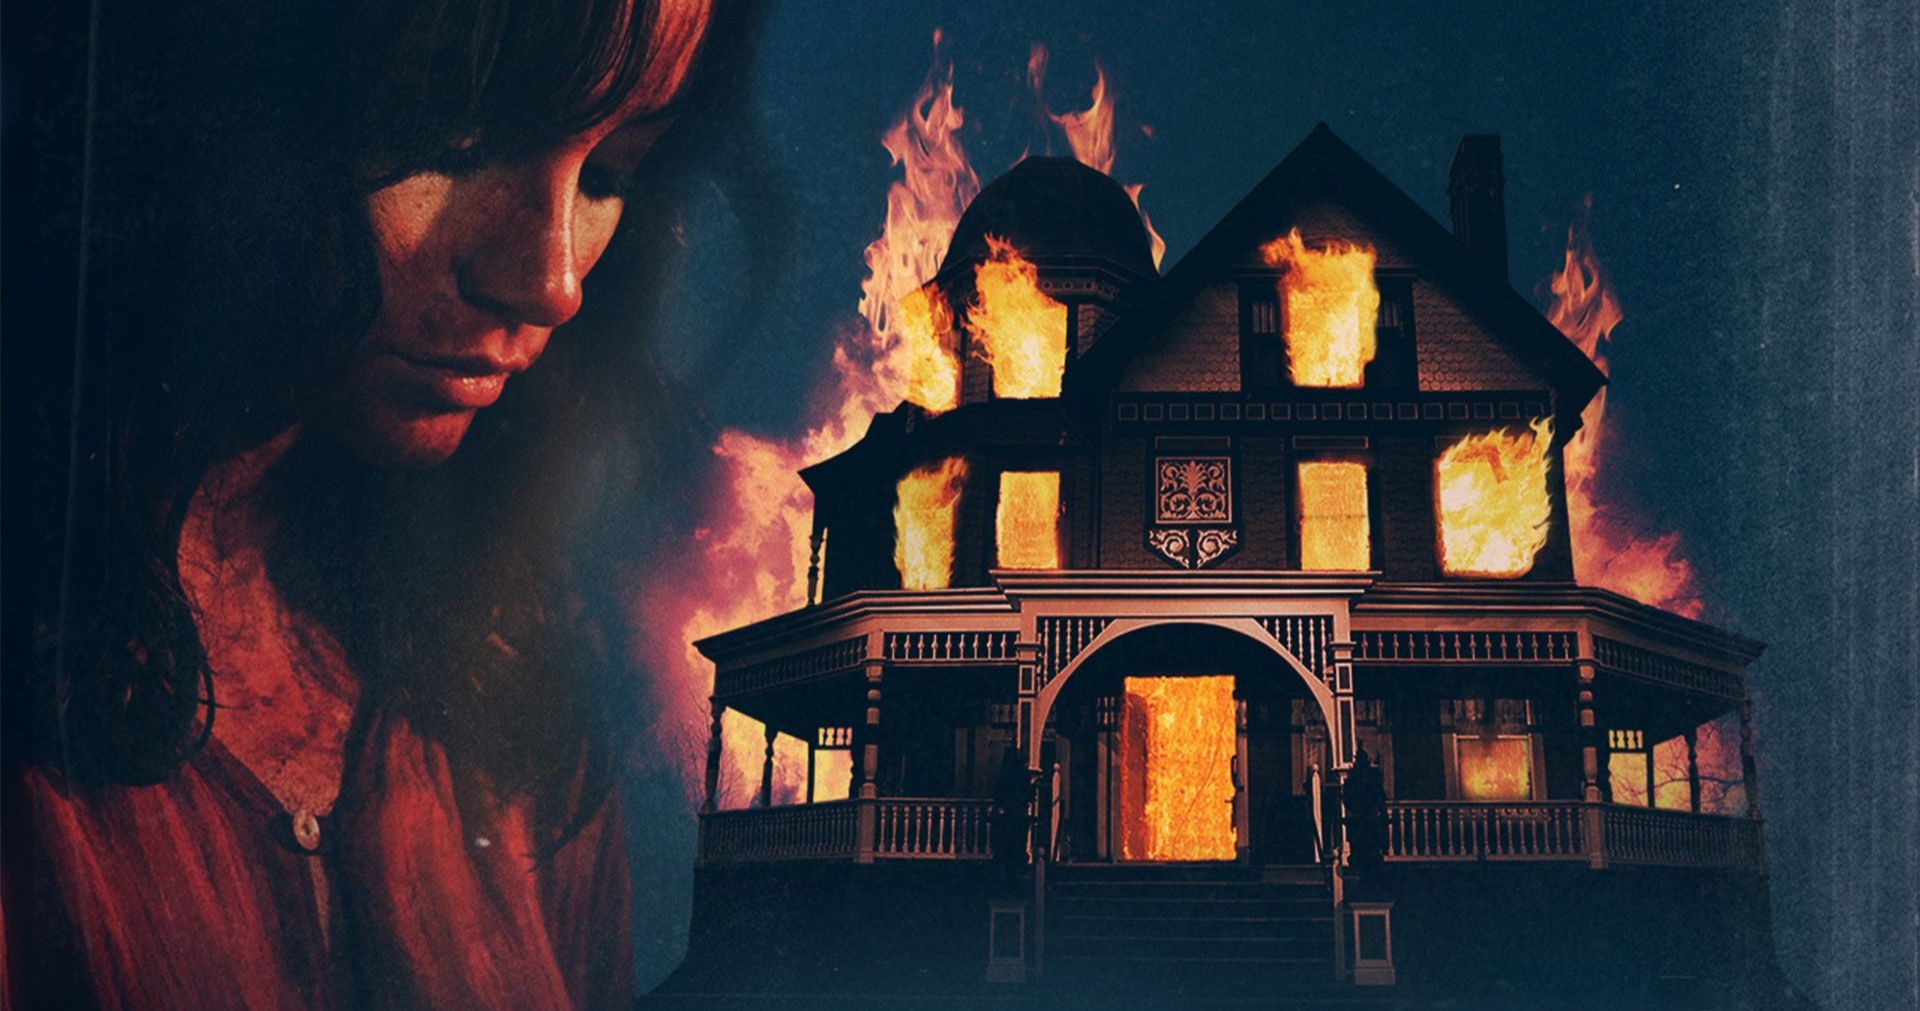 Watch The House of the Devil at the Actual House for Its 10th Anniversary